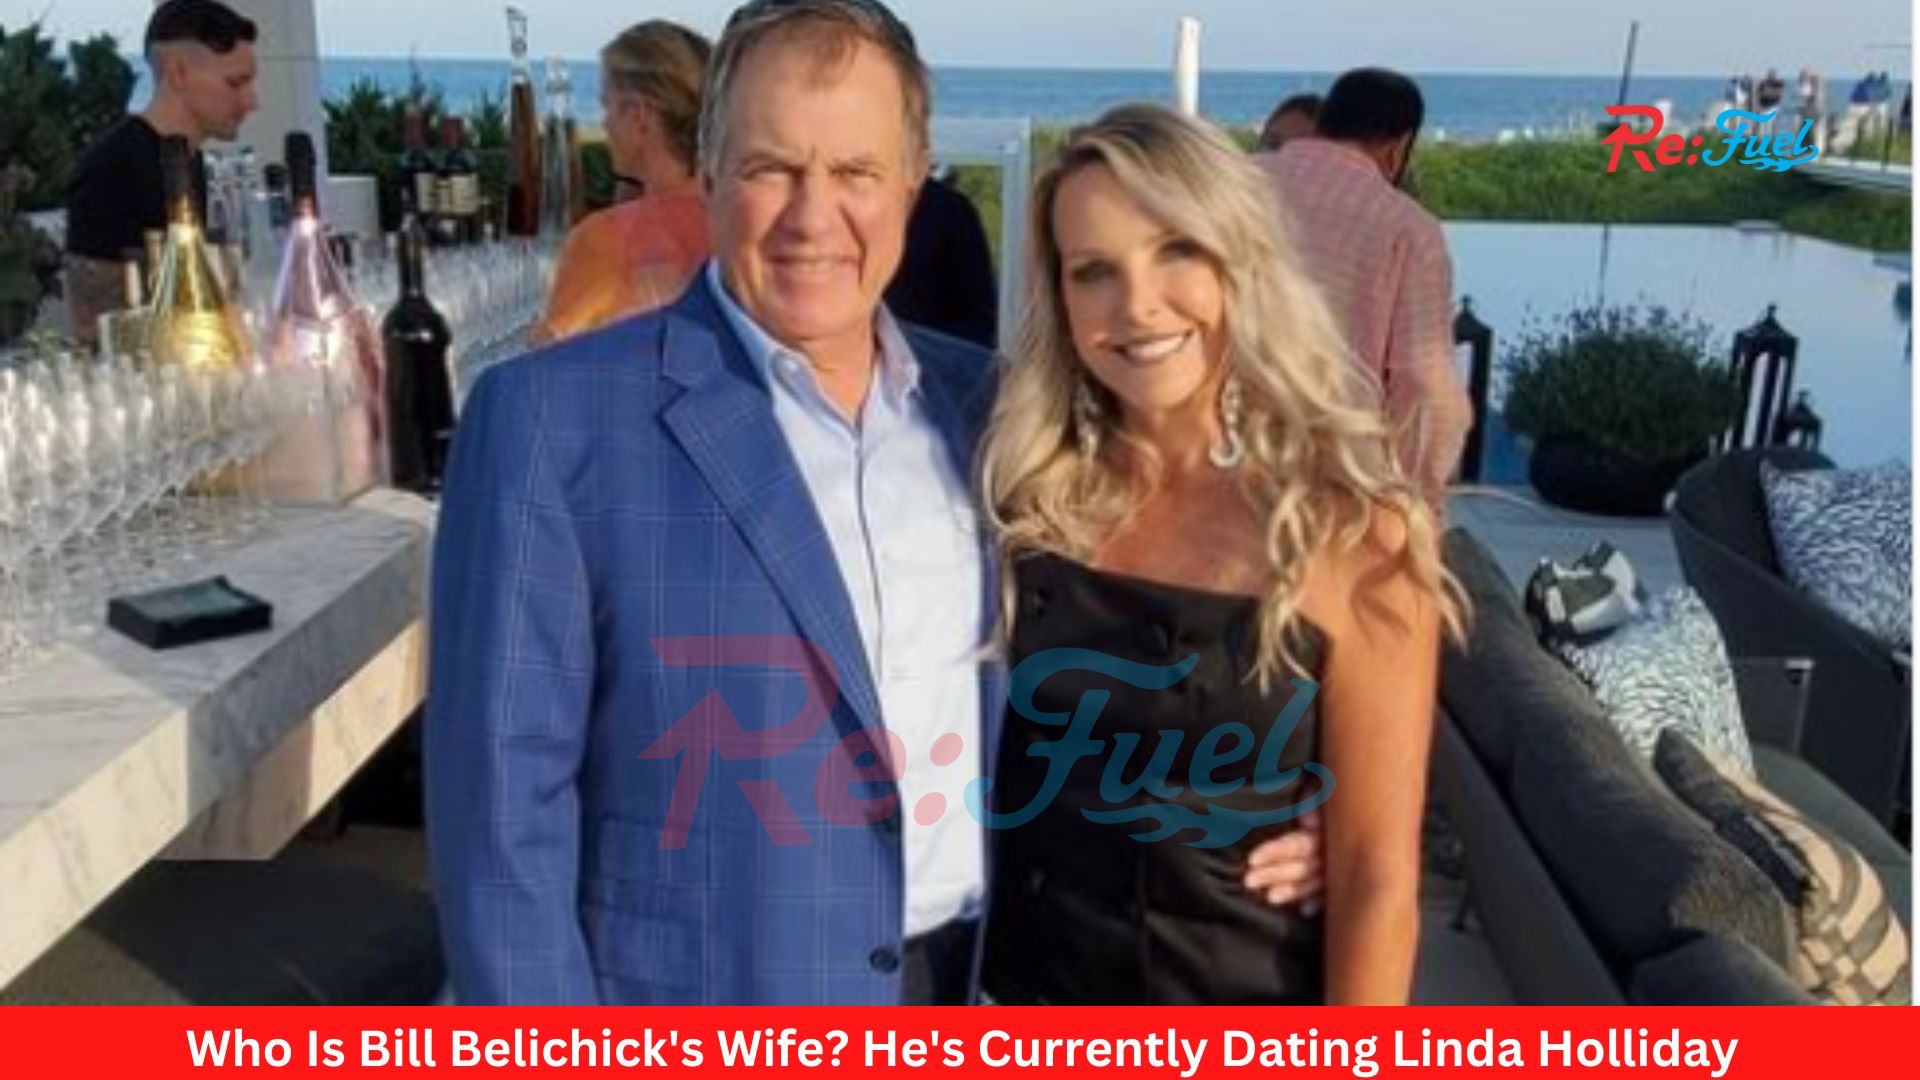 Who Is Bill Belichick's Wife? He's Currently Dating Linda Holliday